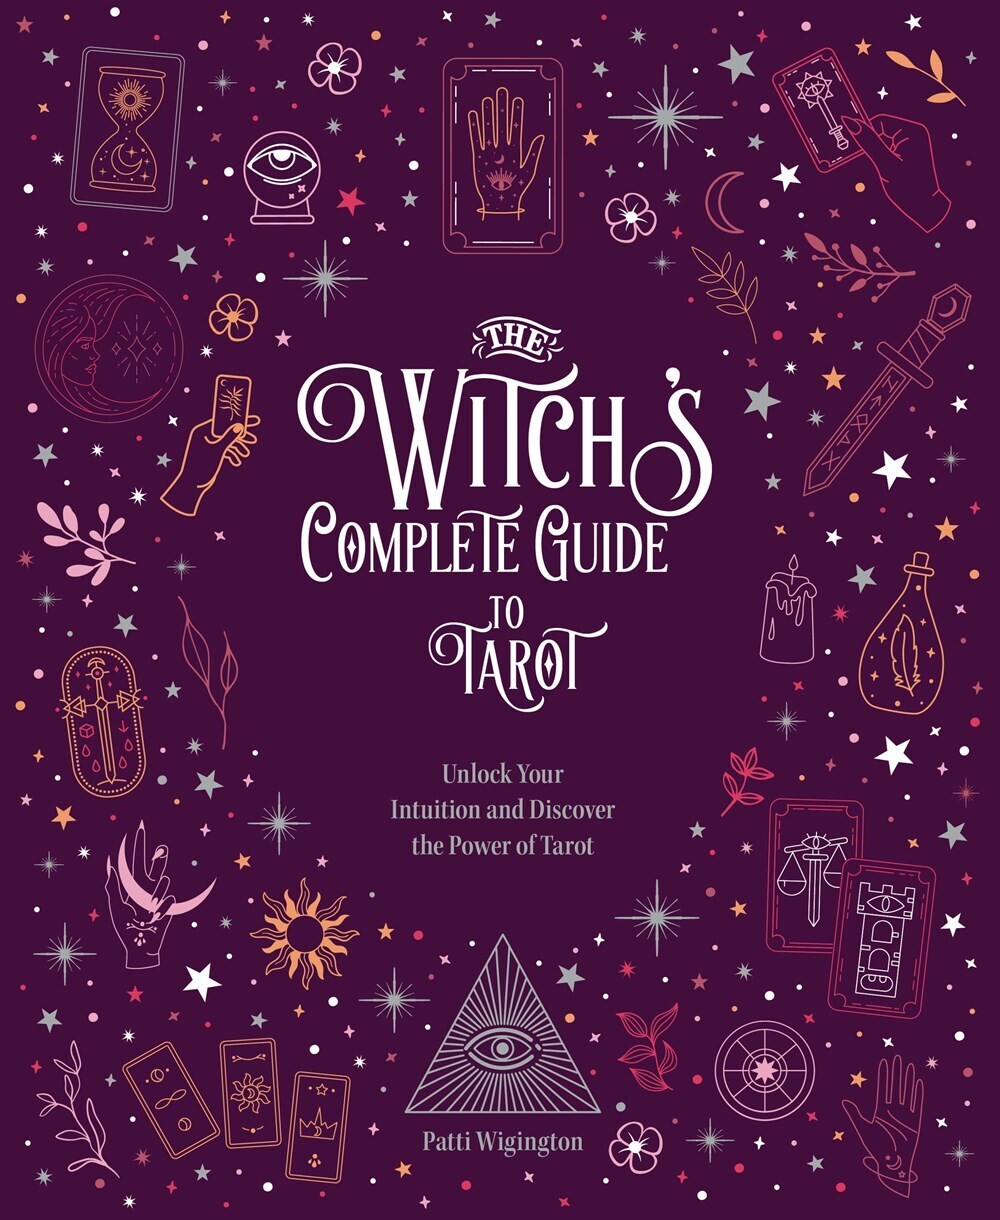 The Witch's Complete Guide To Tarot